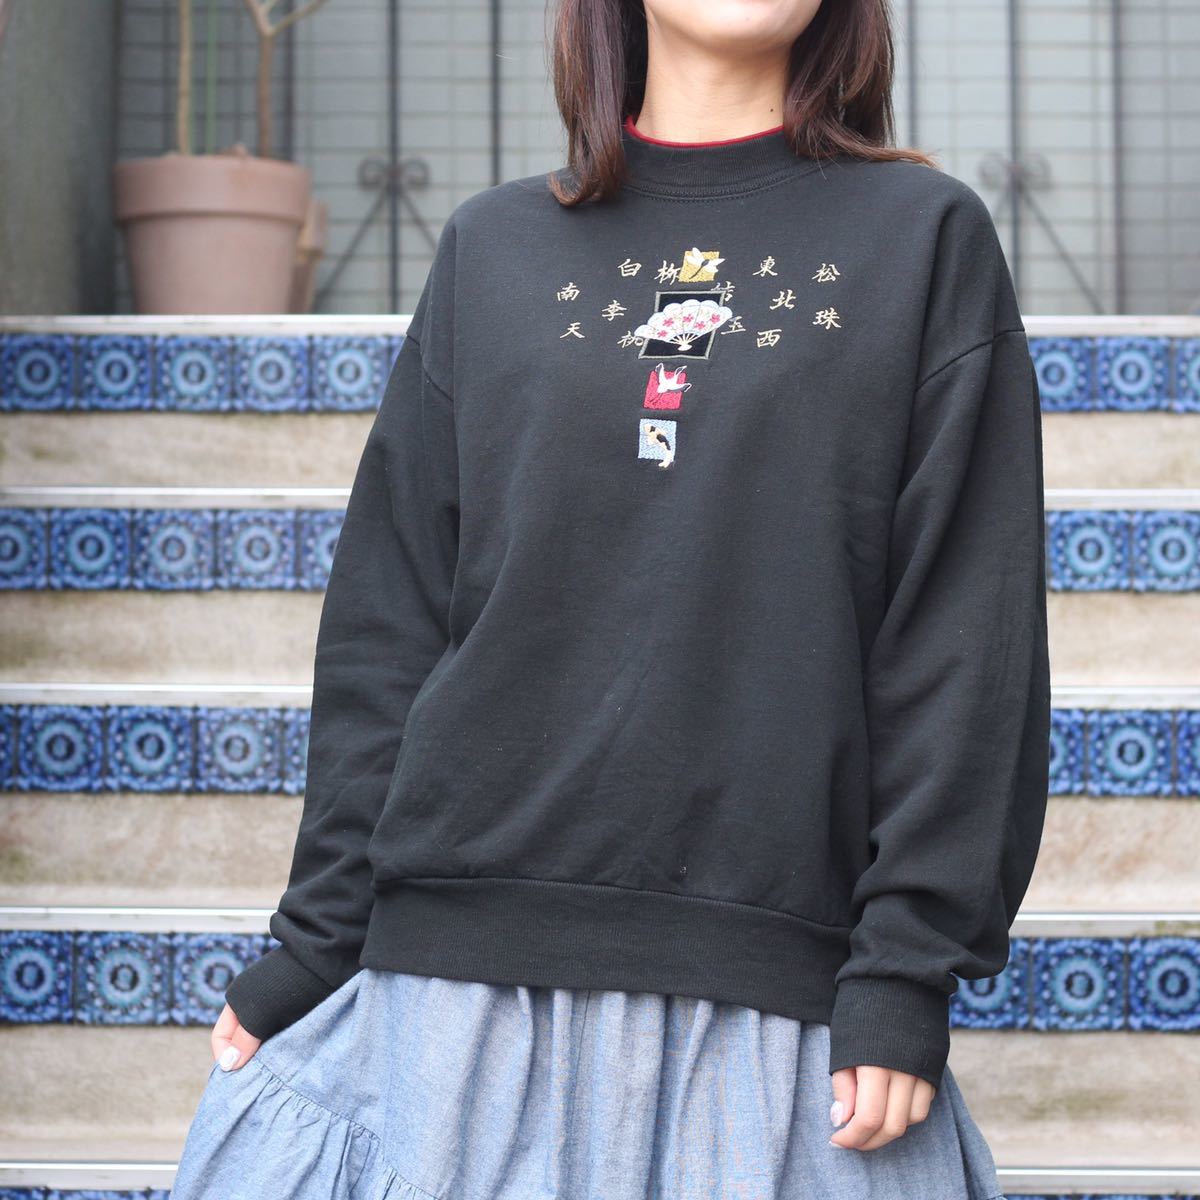 USA VINTAGE TOP STITCH EMBROIDERY DESIGN SWEAT SHIRT/アメリカ古着刺繍デザインスウェット